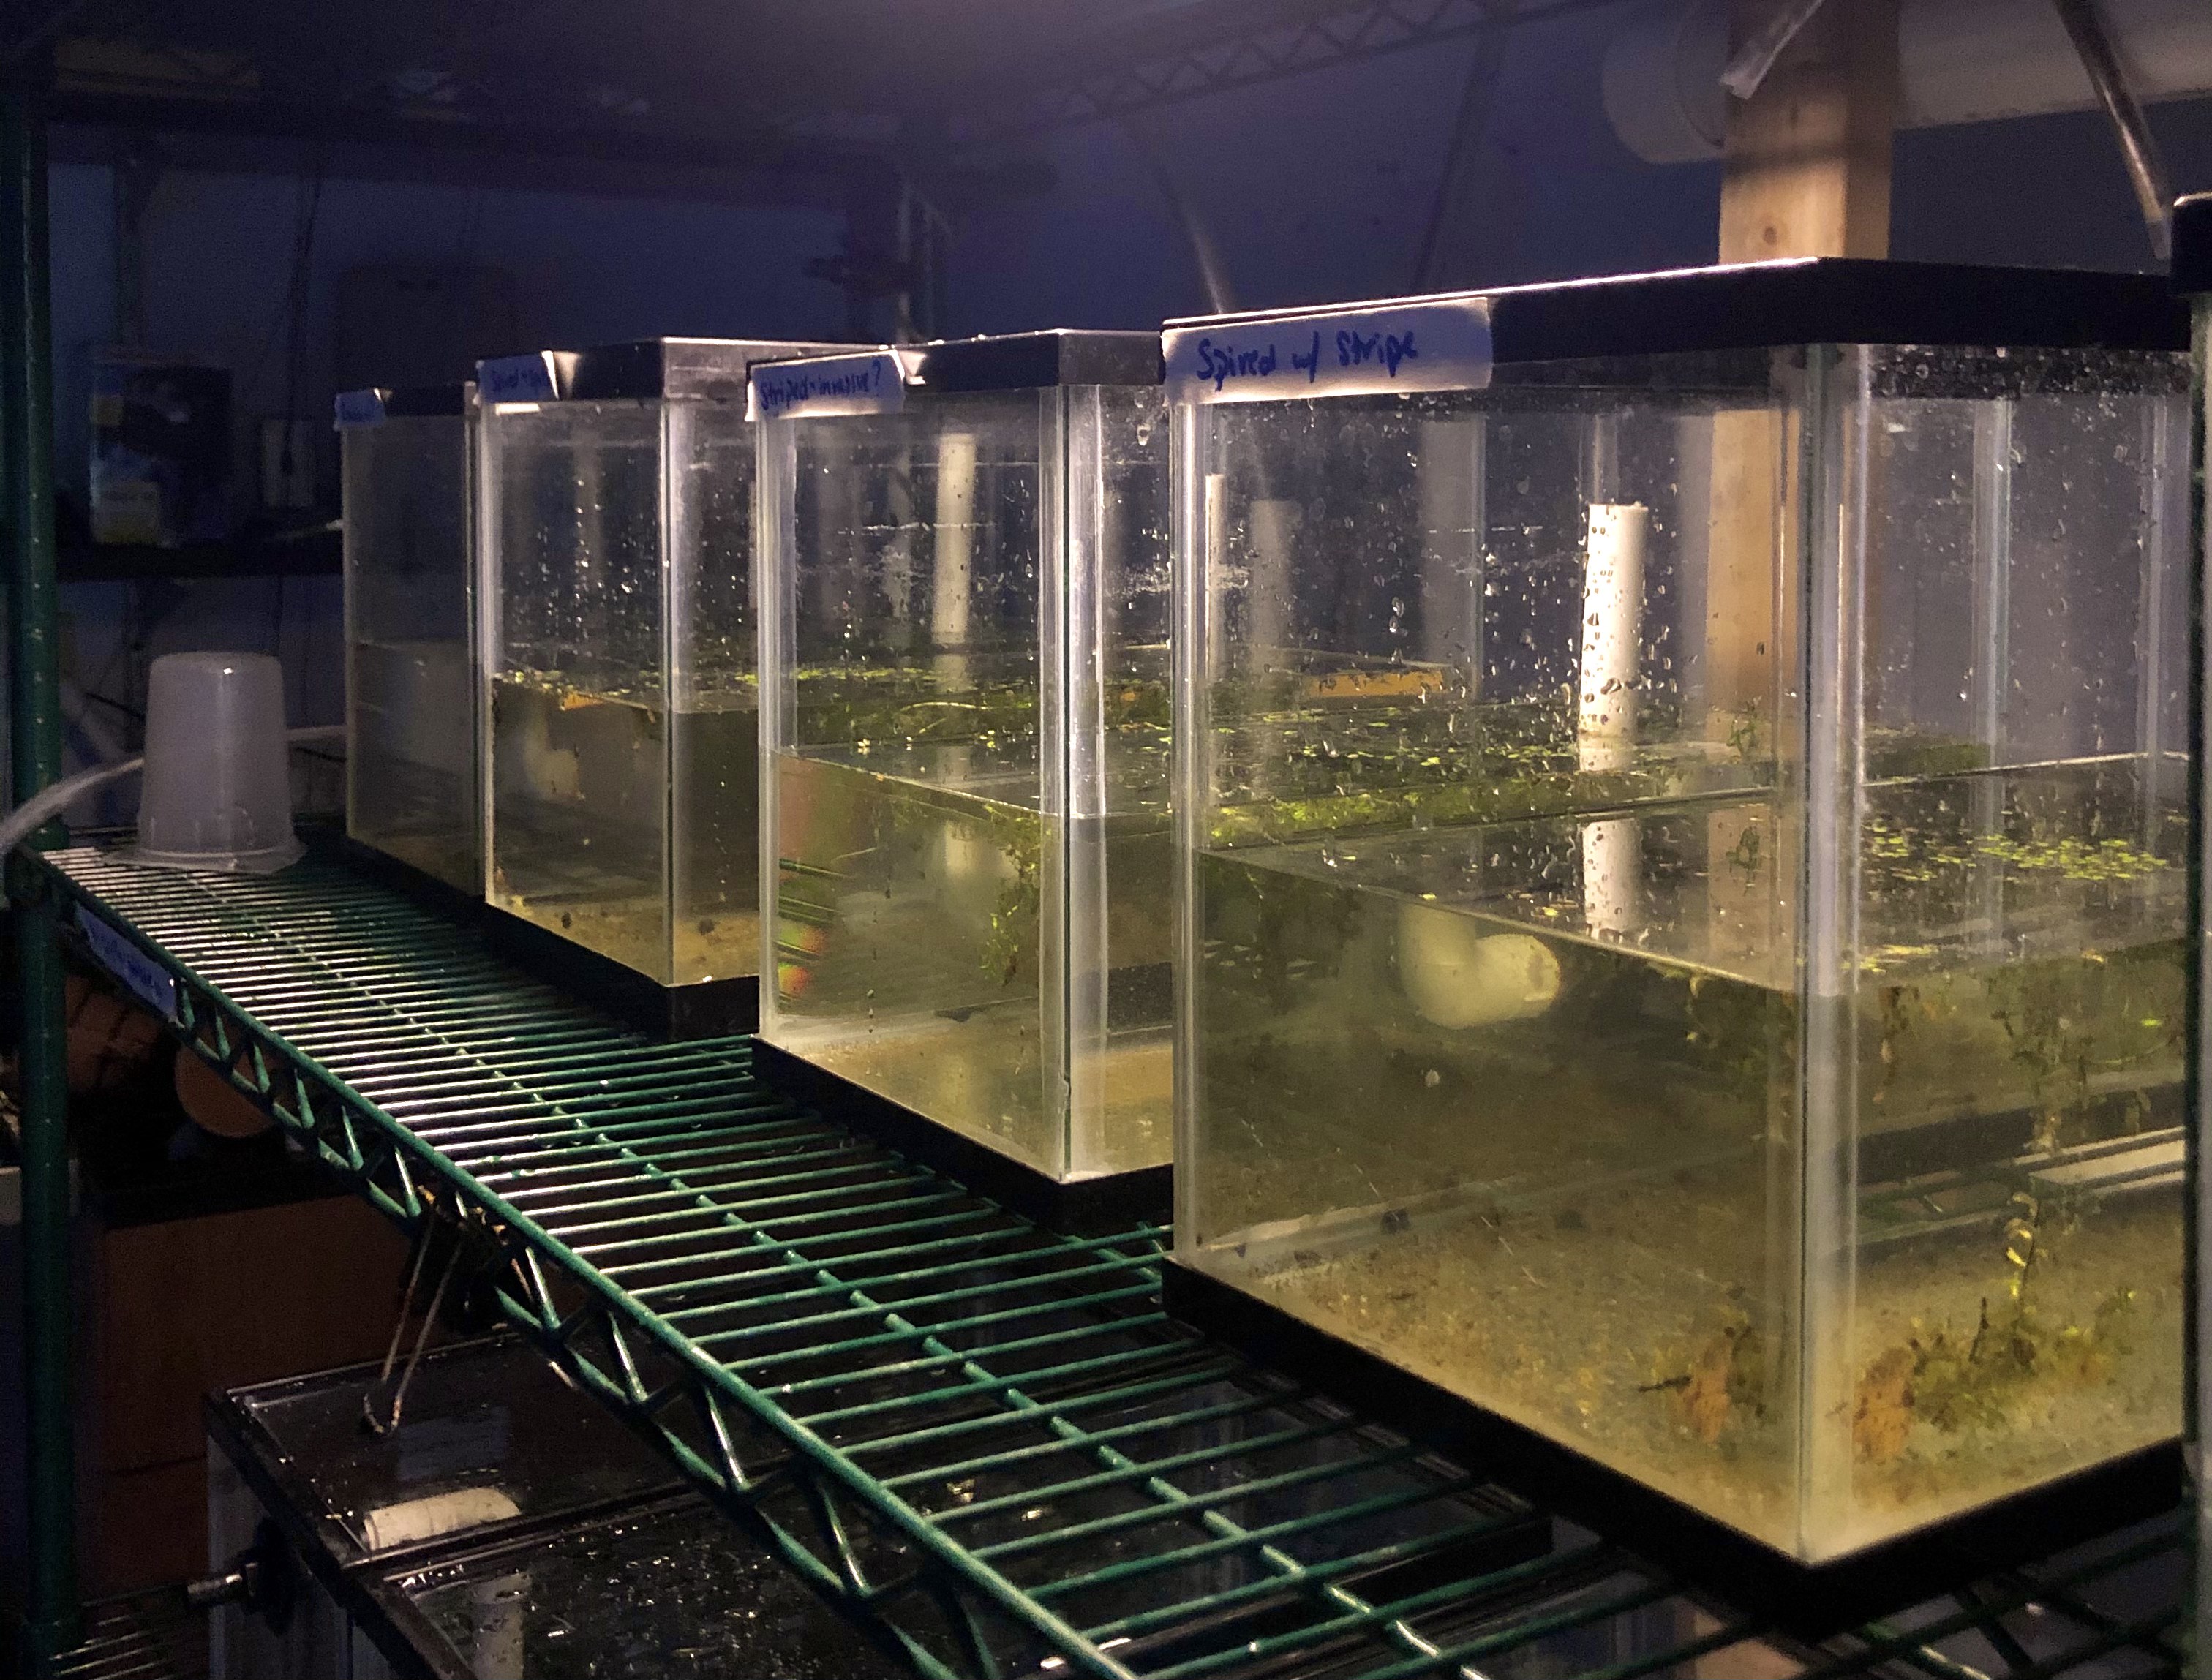 Four ten-gallon fish tanks sit on a wire shelving unit in a dark room. A light illuminates the tanks, which are half full of water and have some vegetation inside. There are a few tanks on a lower shelf, mostly out of frame.